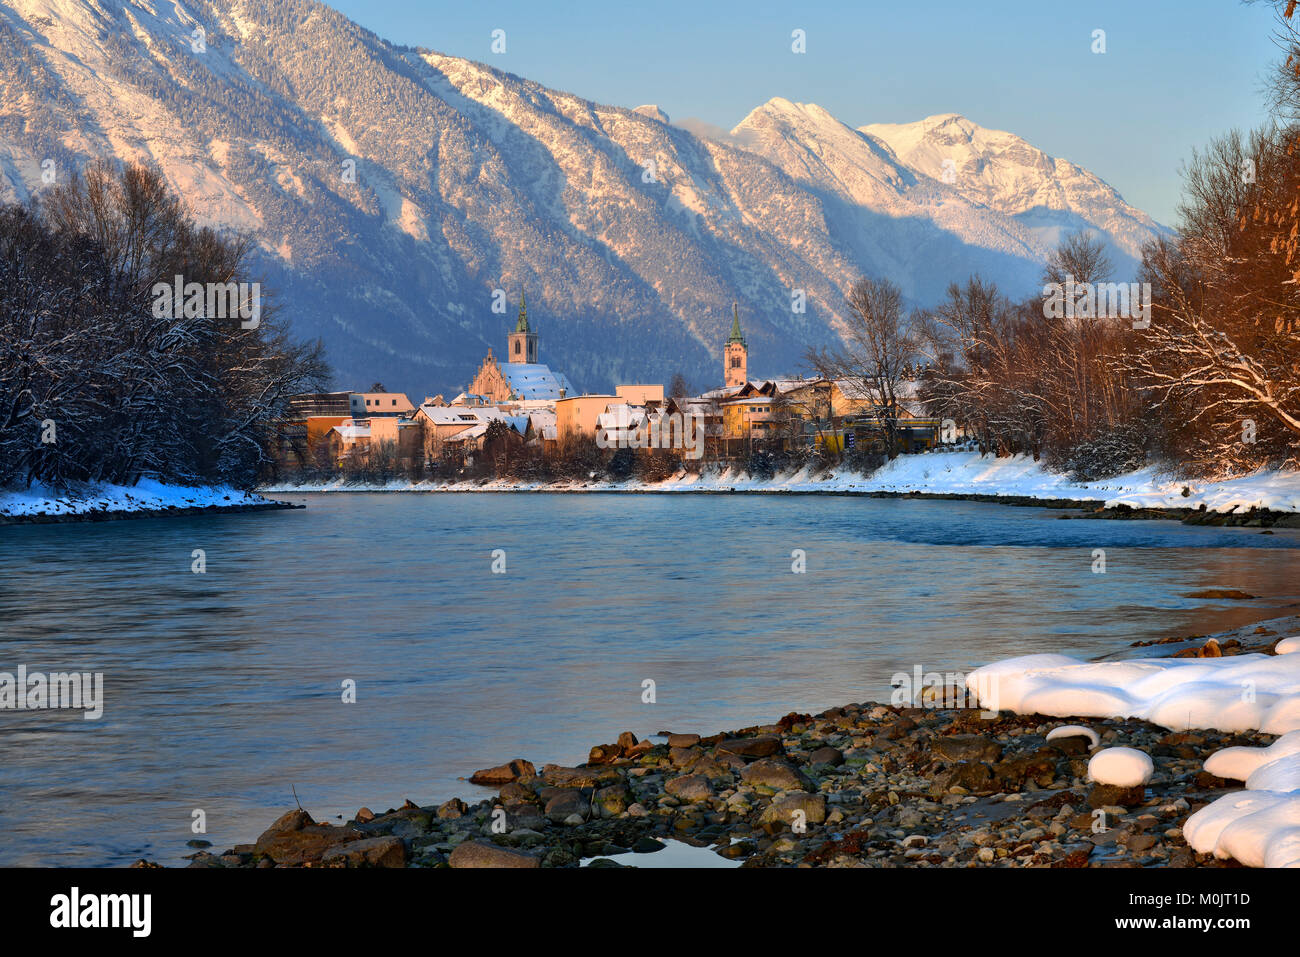 River Inn with city centre in winter, at the back mountains Stanser-Joch and Rofan Mountains, Schwaz, Tyrol, Austria Stock Photo